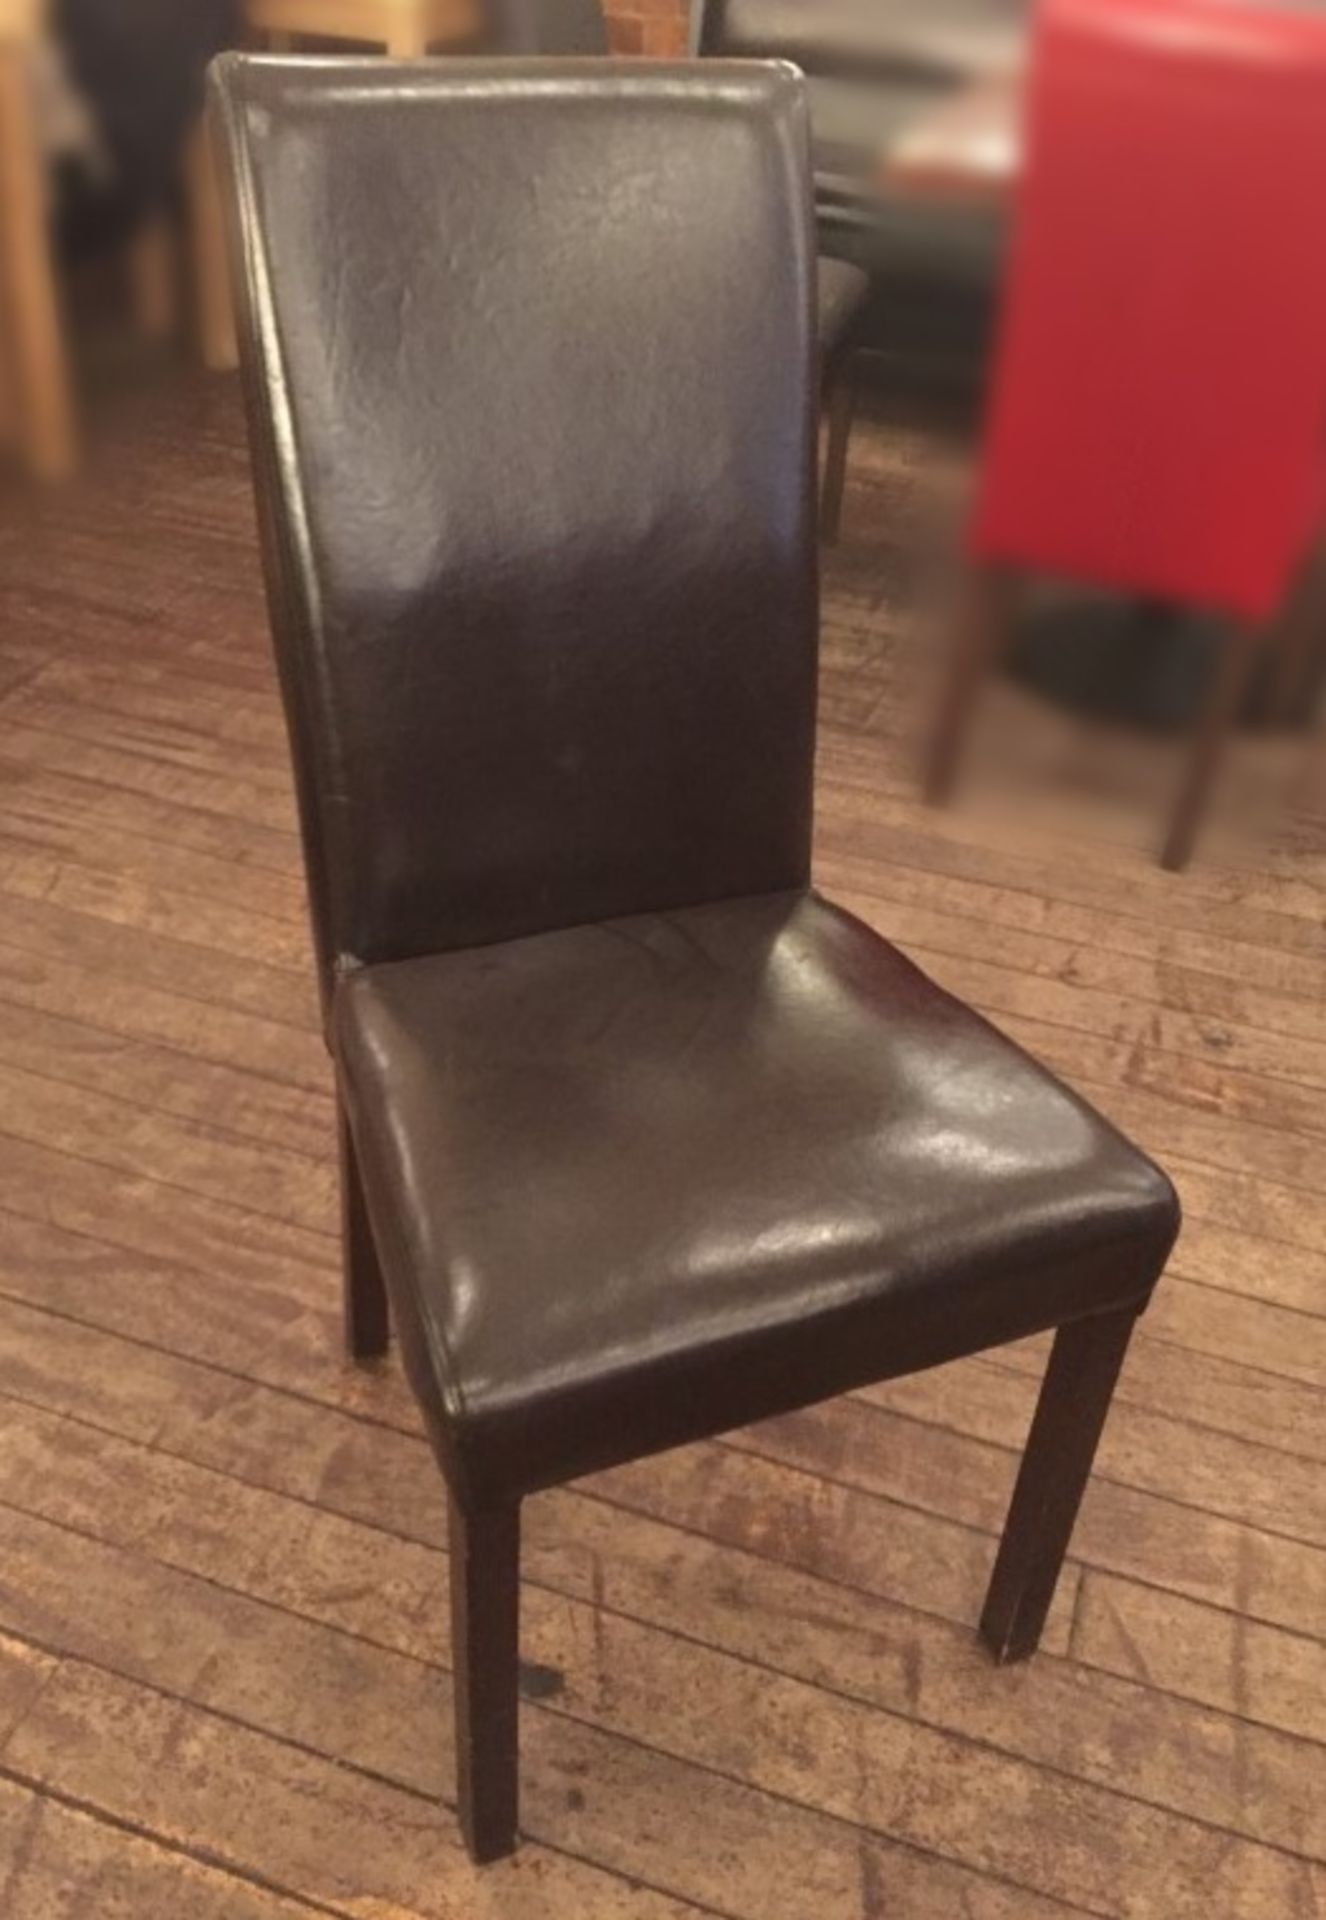 4 x Brown Faux Leather Dining Chairs - Seating Dimensions: 47 x 38cm x Height 100cm, Seat Height